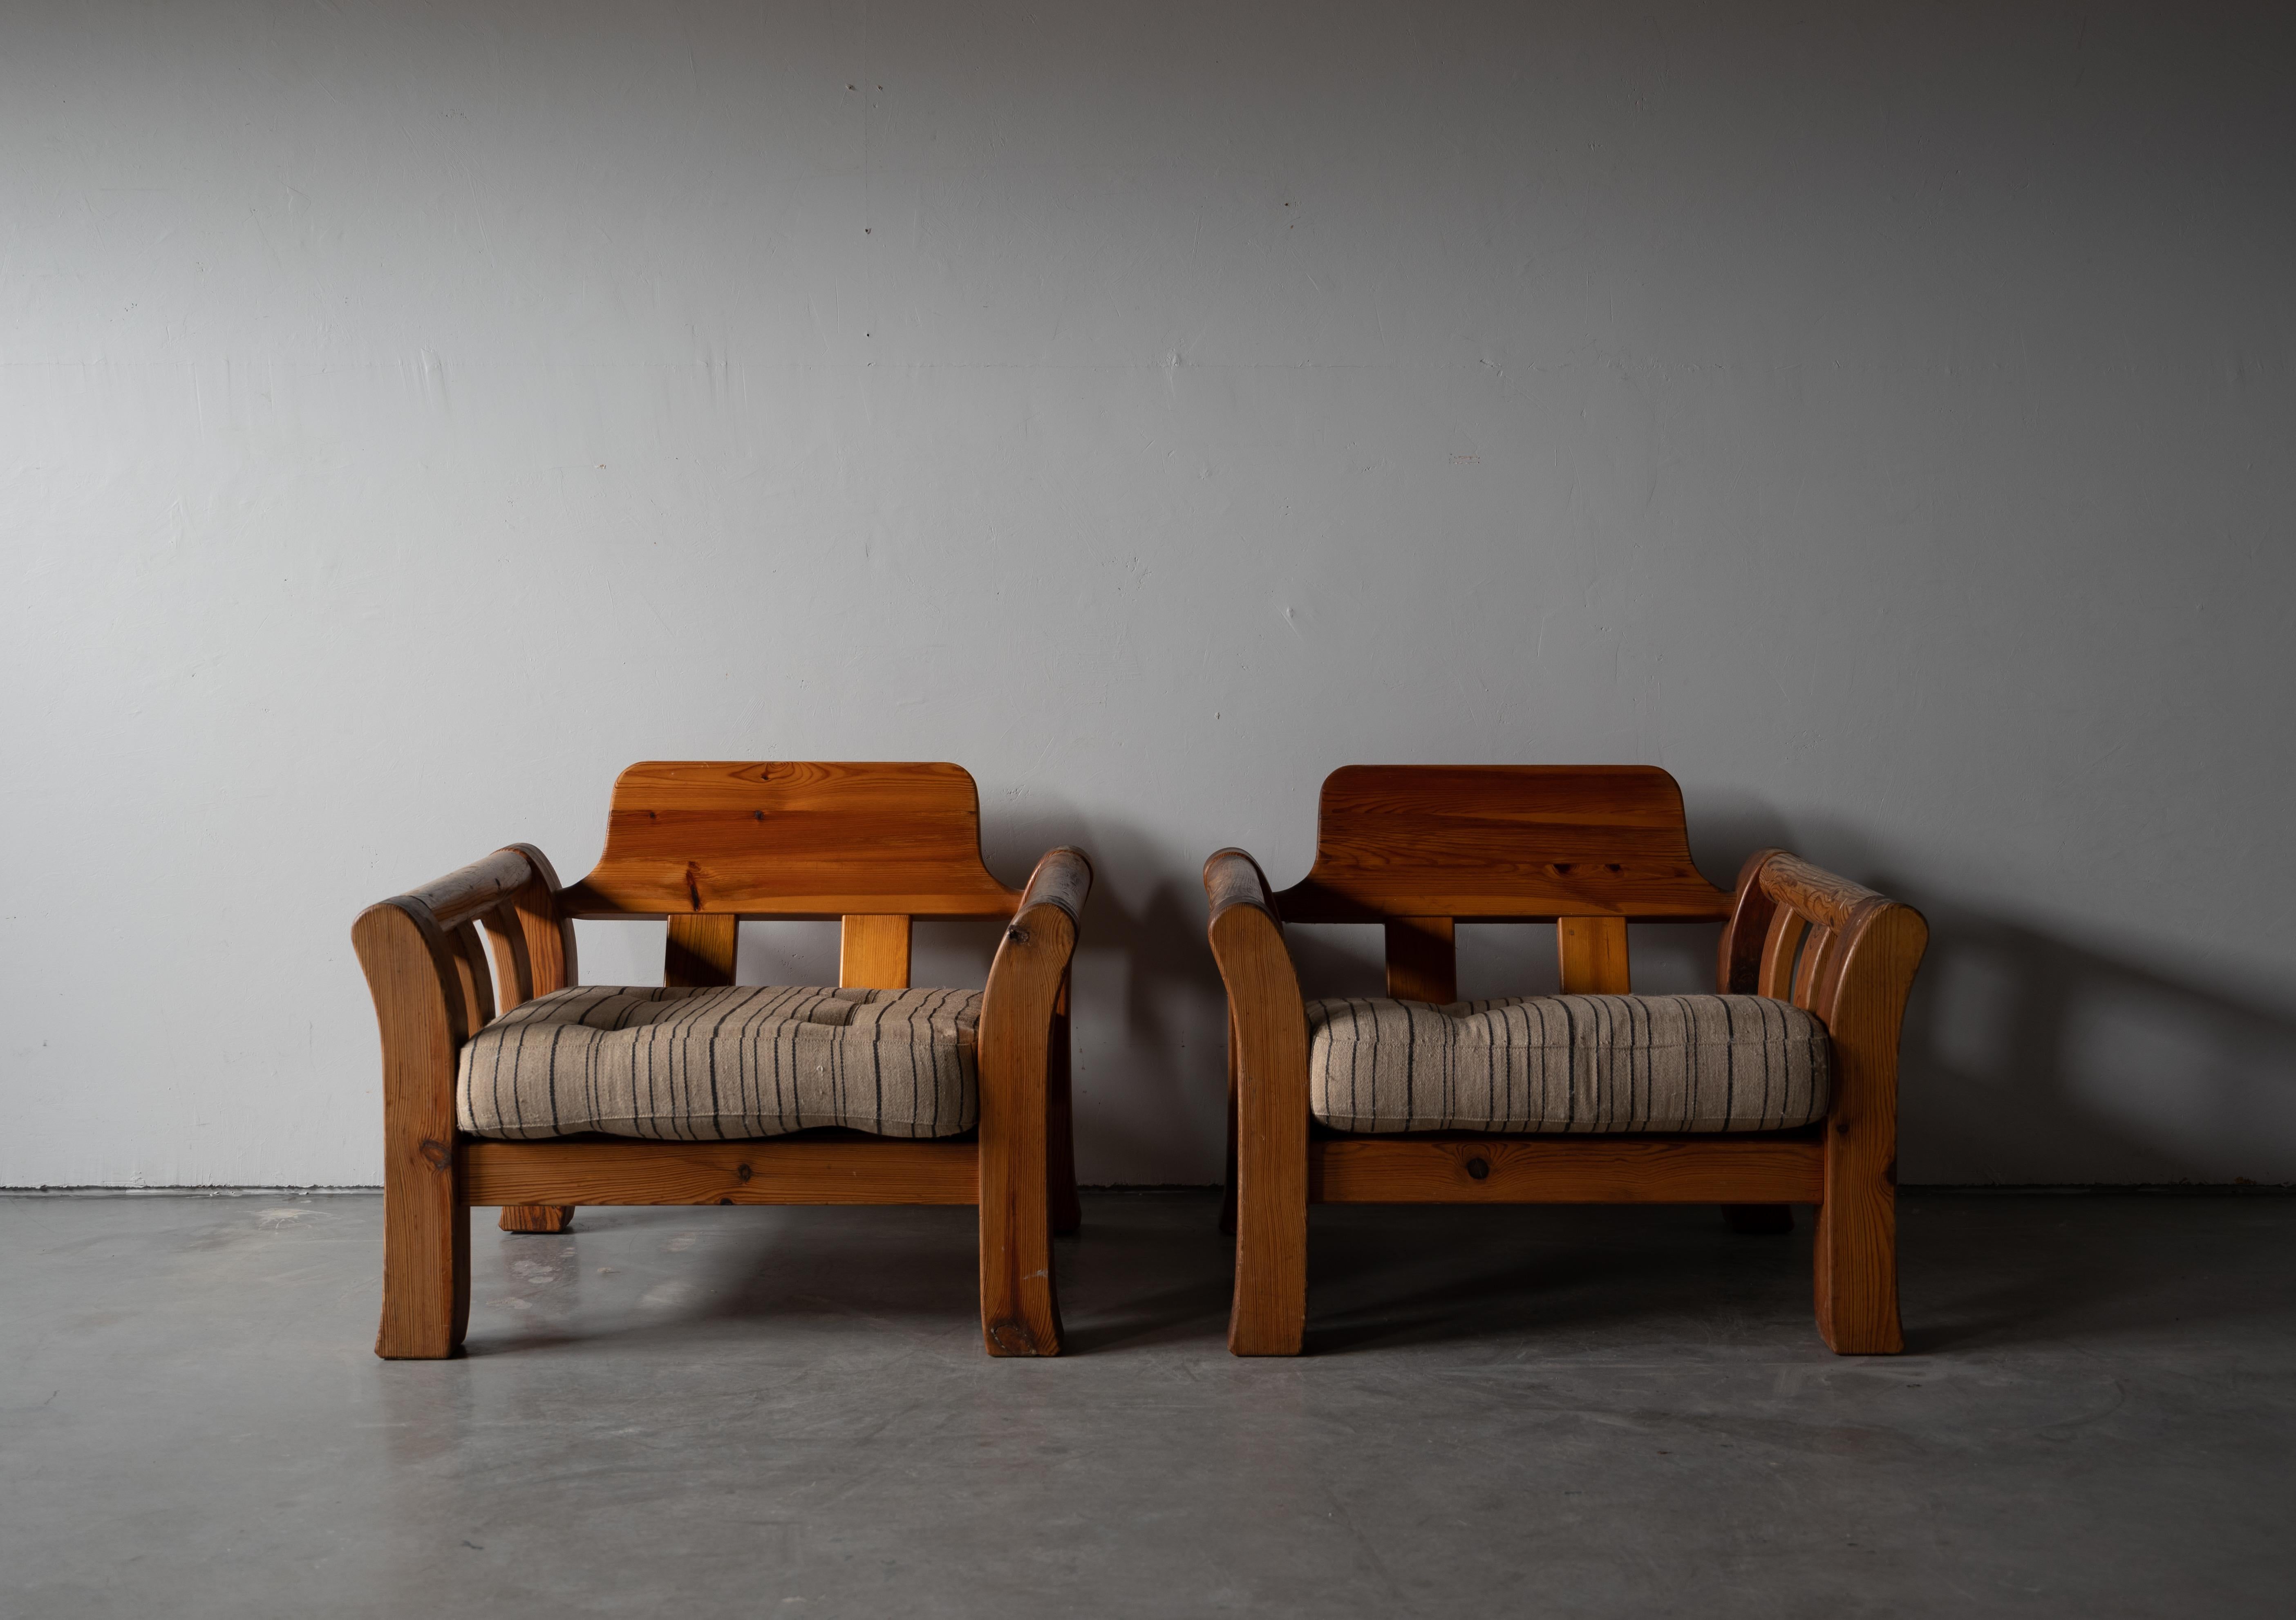 Danish Designer, Modernist Lounge Chairs, Solid Pine, Fabric, Denmark, 1970s For Sale 13